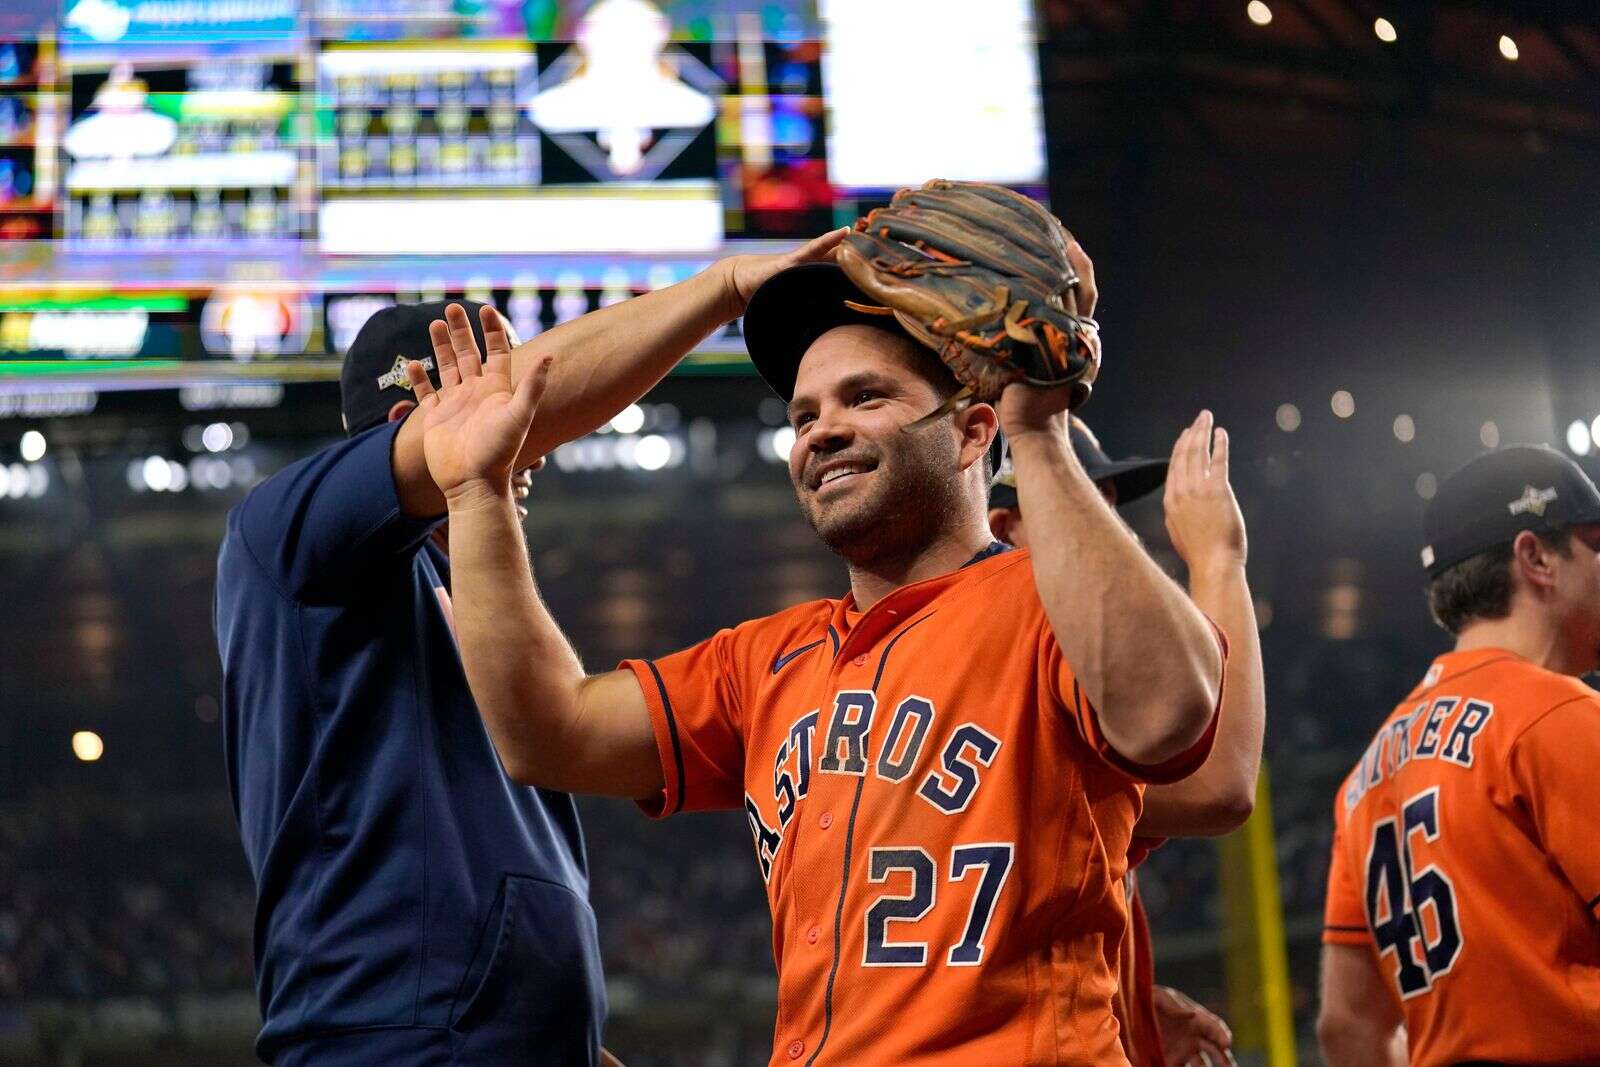 Jose Altuve leads Astros' hitters in World Series Game 2